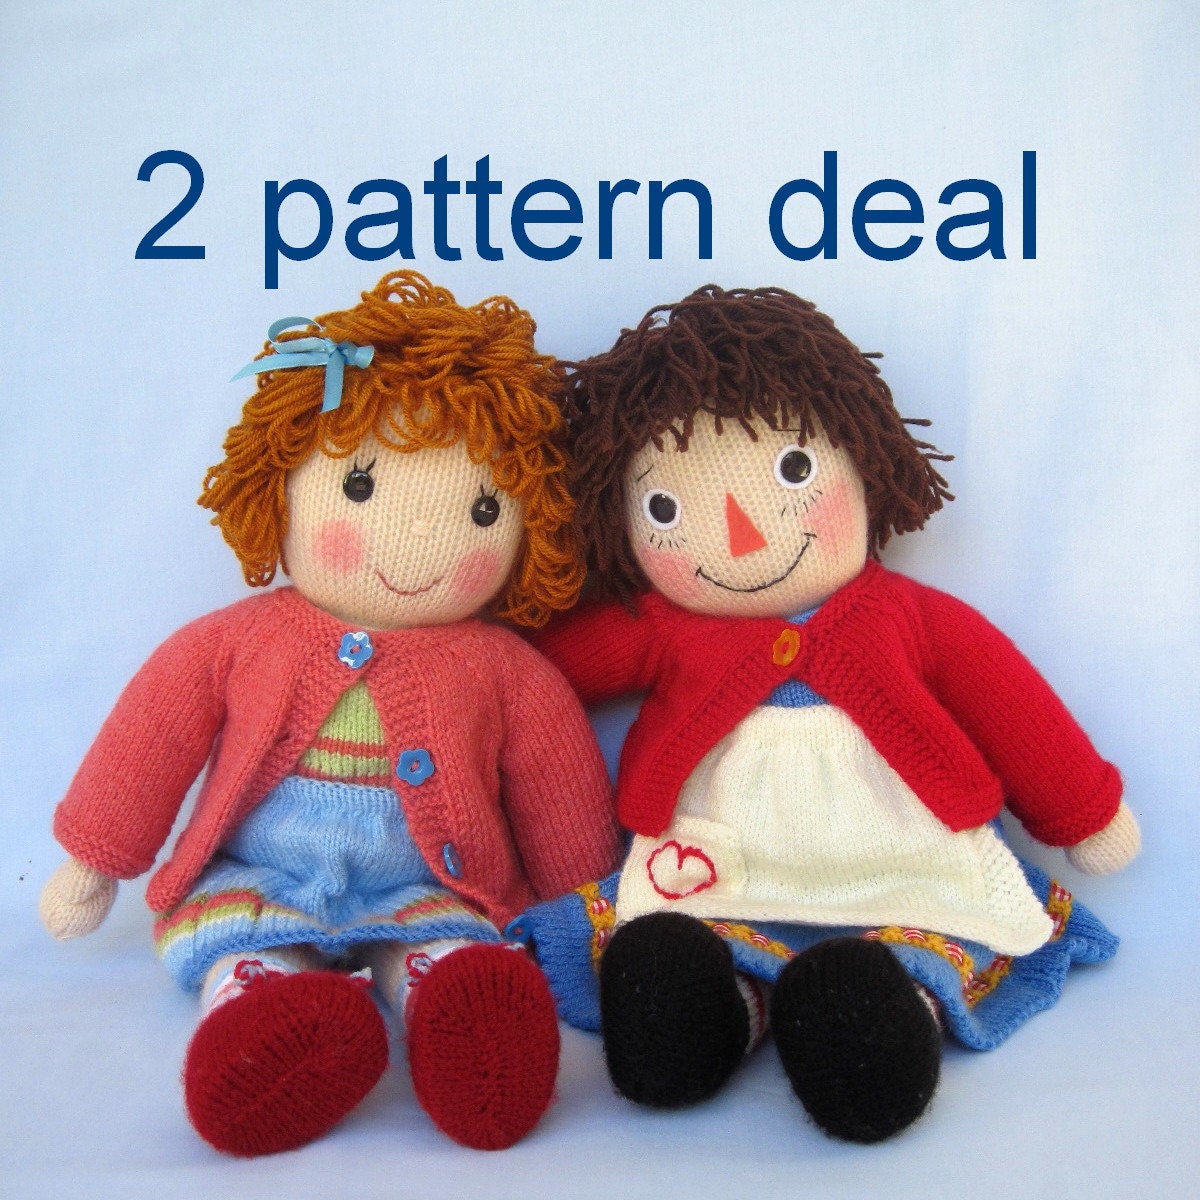  Belinda Jane and Merrily Ann (Raggedy Ann) - 2 pattern deal - knitted toy dolls - INSTANT DOWNLOAD - PDF email knitting patterns - ePattern         May 22, 2014 at 04:59PM   